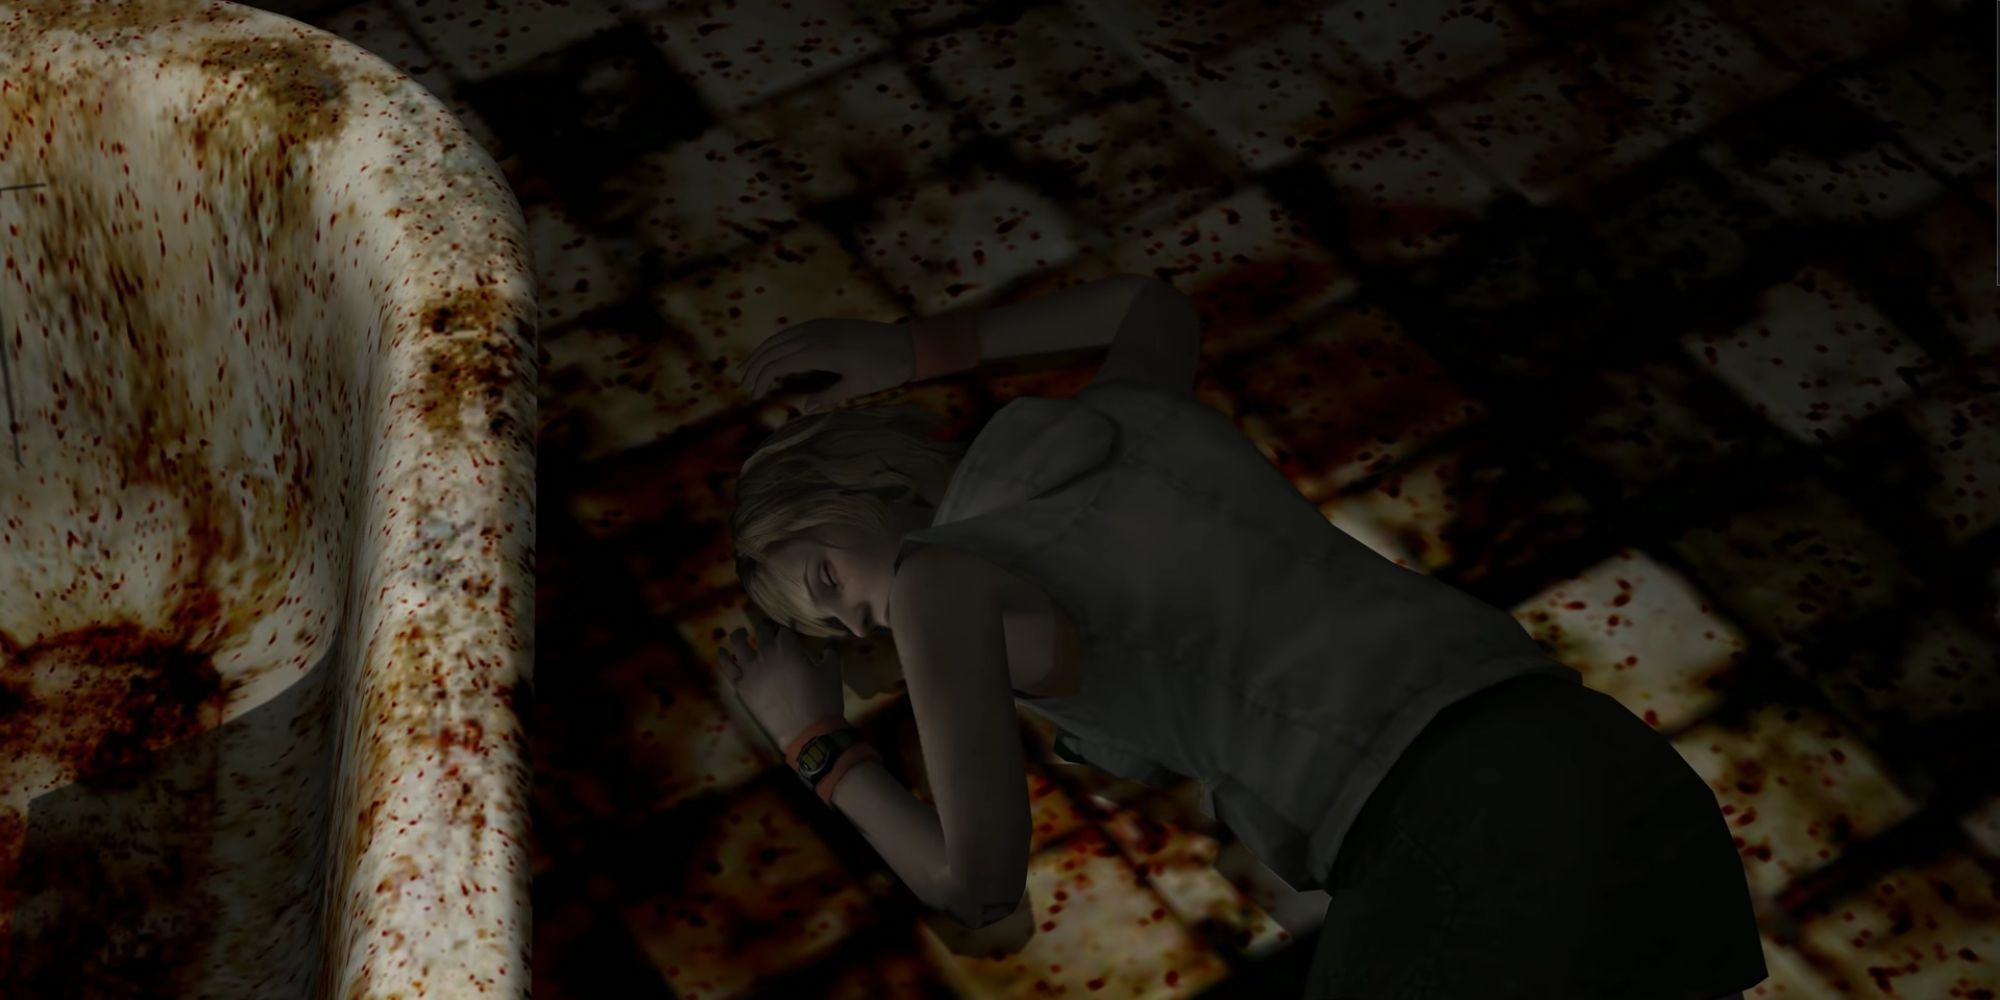 Silent Hill - Plugged In